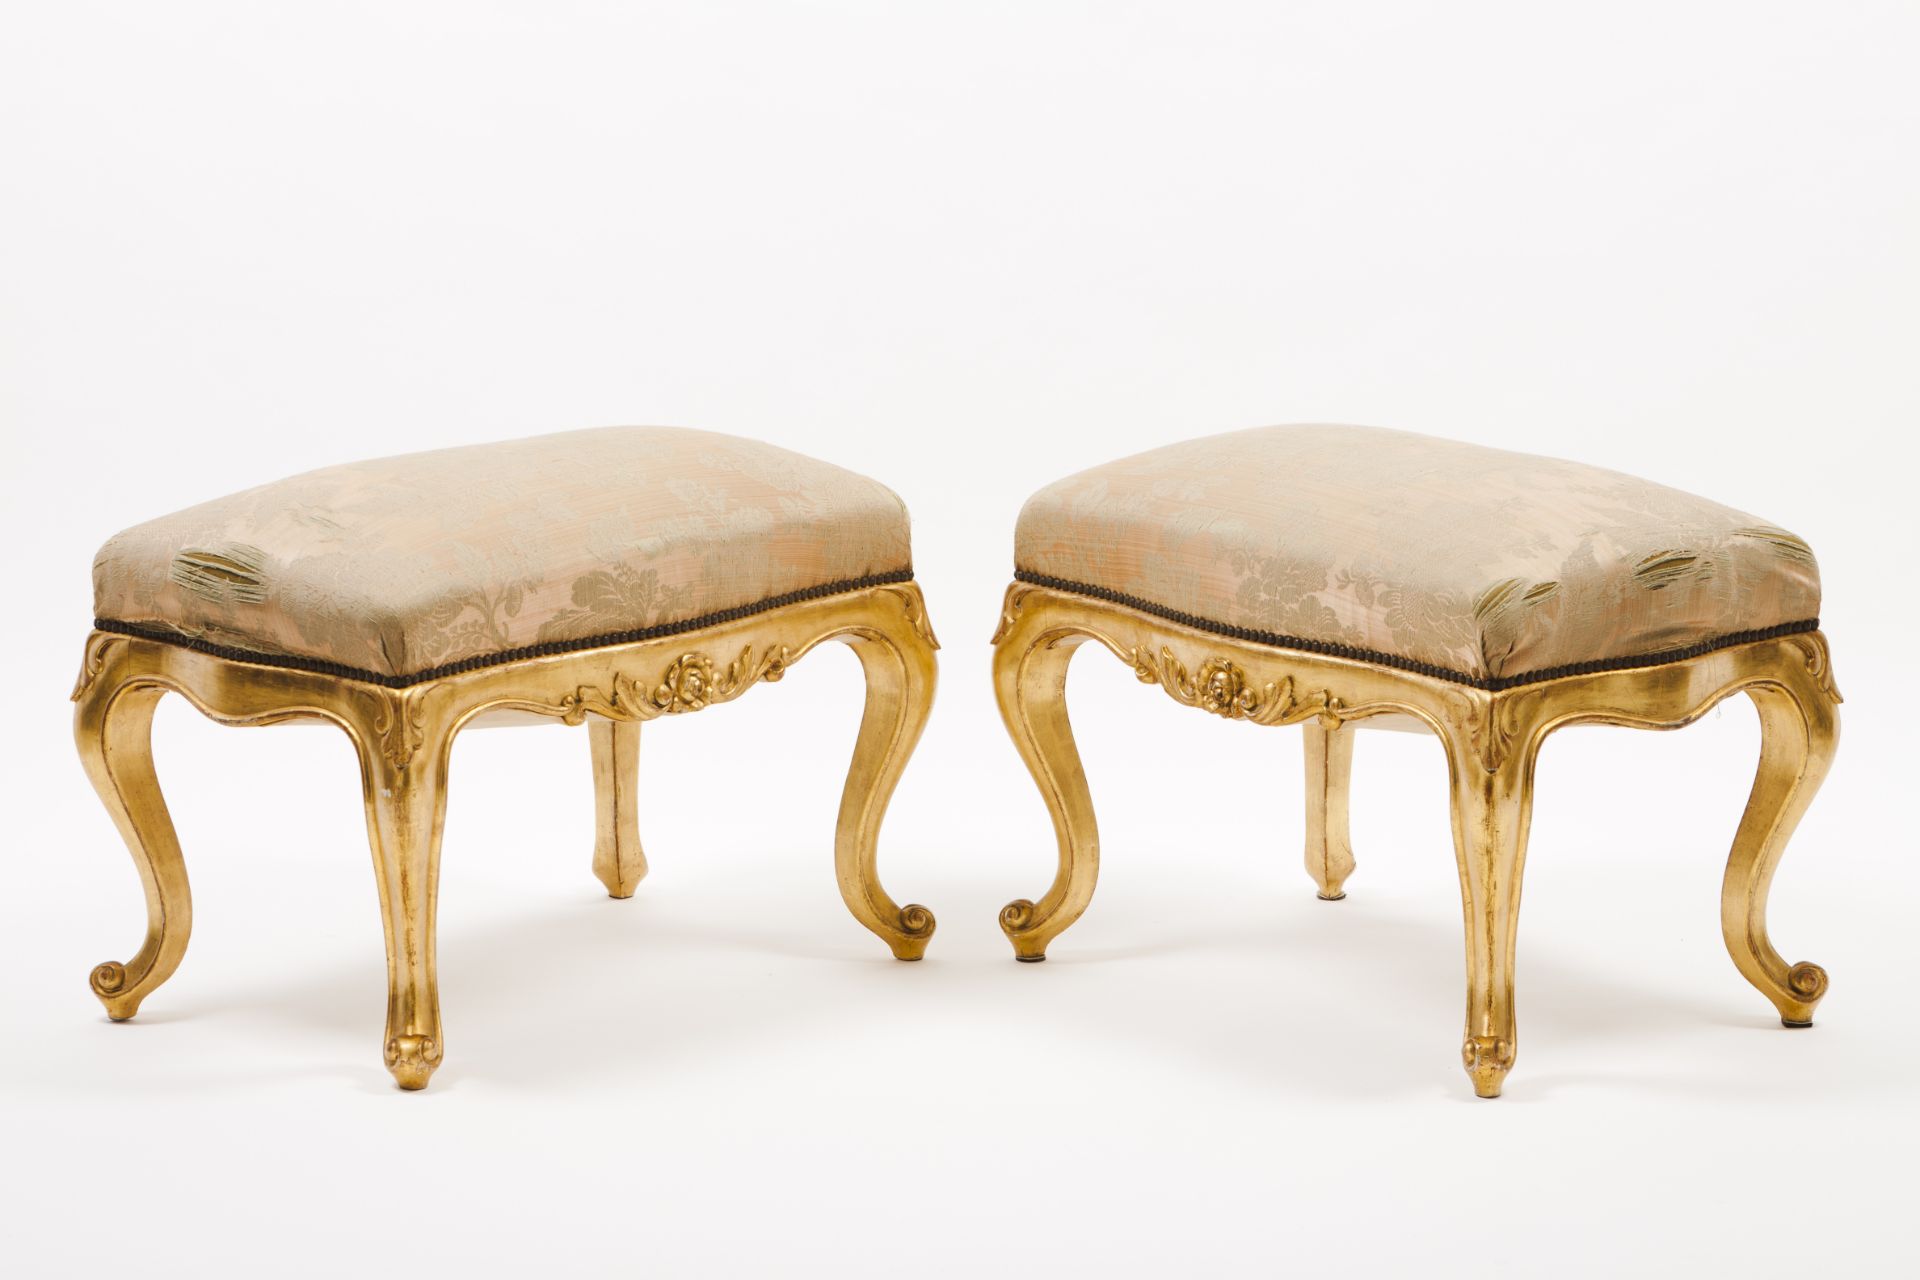 A pair of Louis XV style stoolsGilt and carved wood Silk damask upholstery France, 19th century (